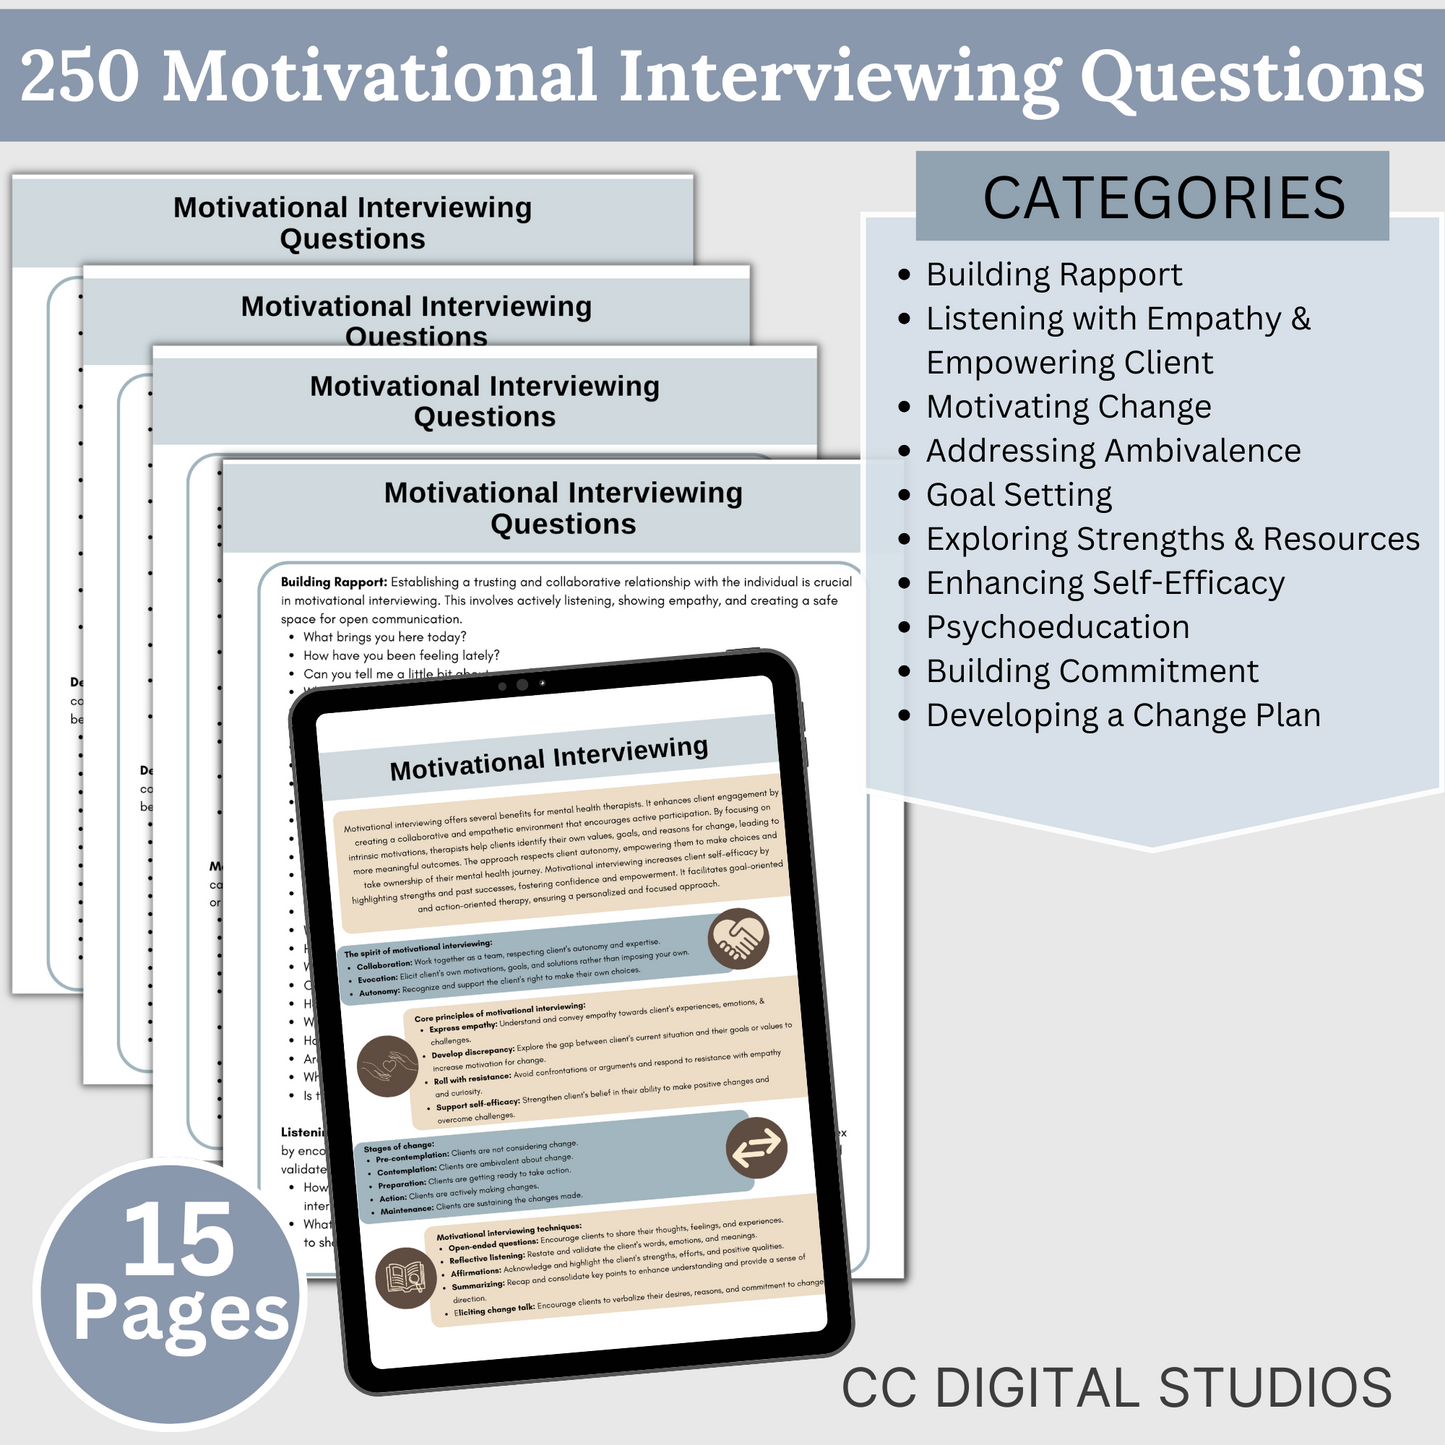 2,750 curated therapy questions across teen therapy, suicide inquiry, redirecting, motivational interviewing, couples therapy, rapport-building, and group therapy. SAVE 25% with this bundle